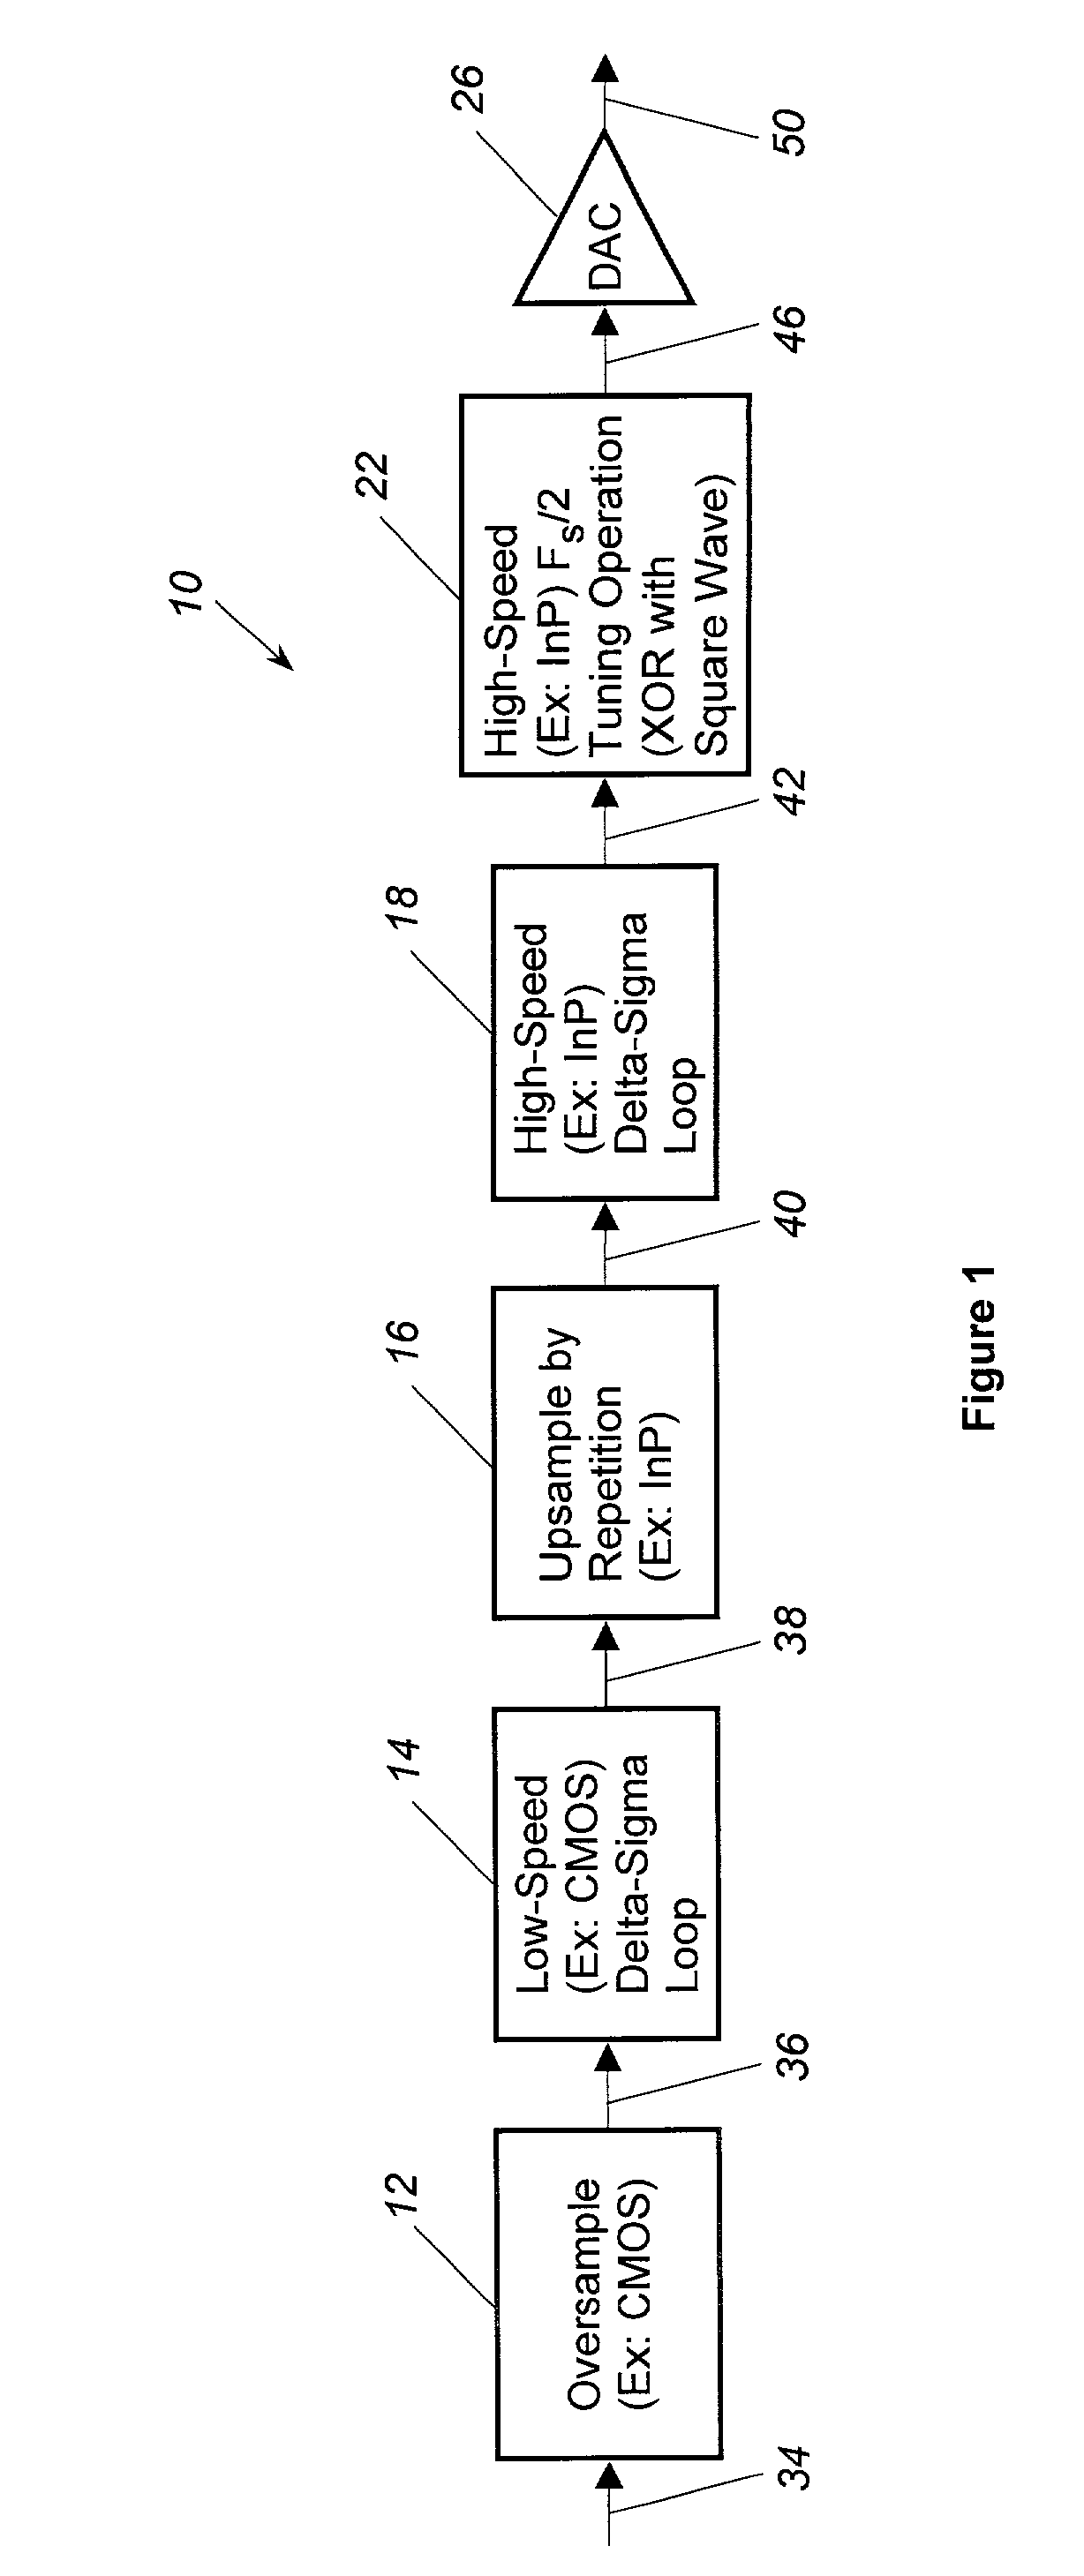 Apparatus and methods for digital-to-analog conversion